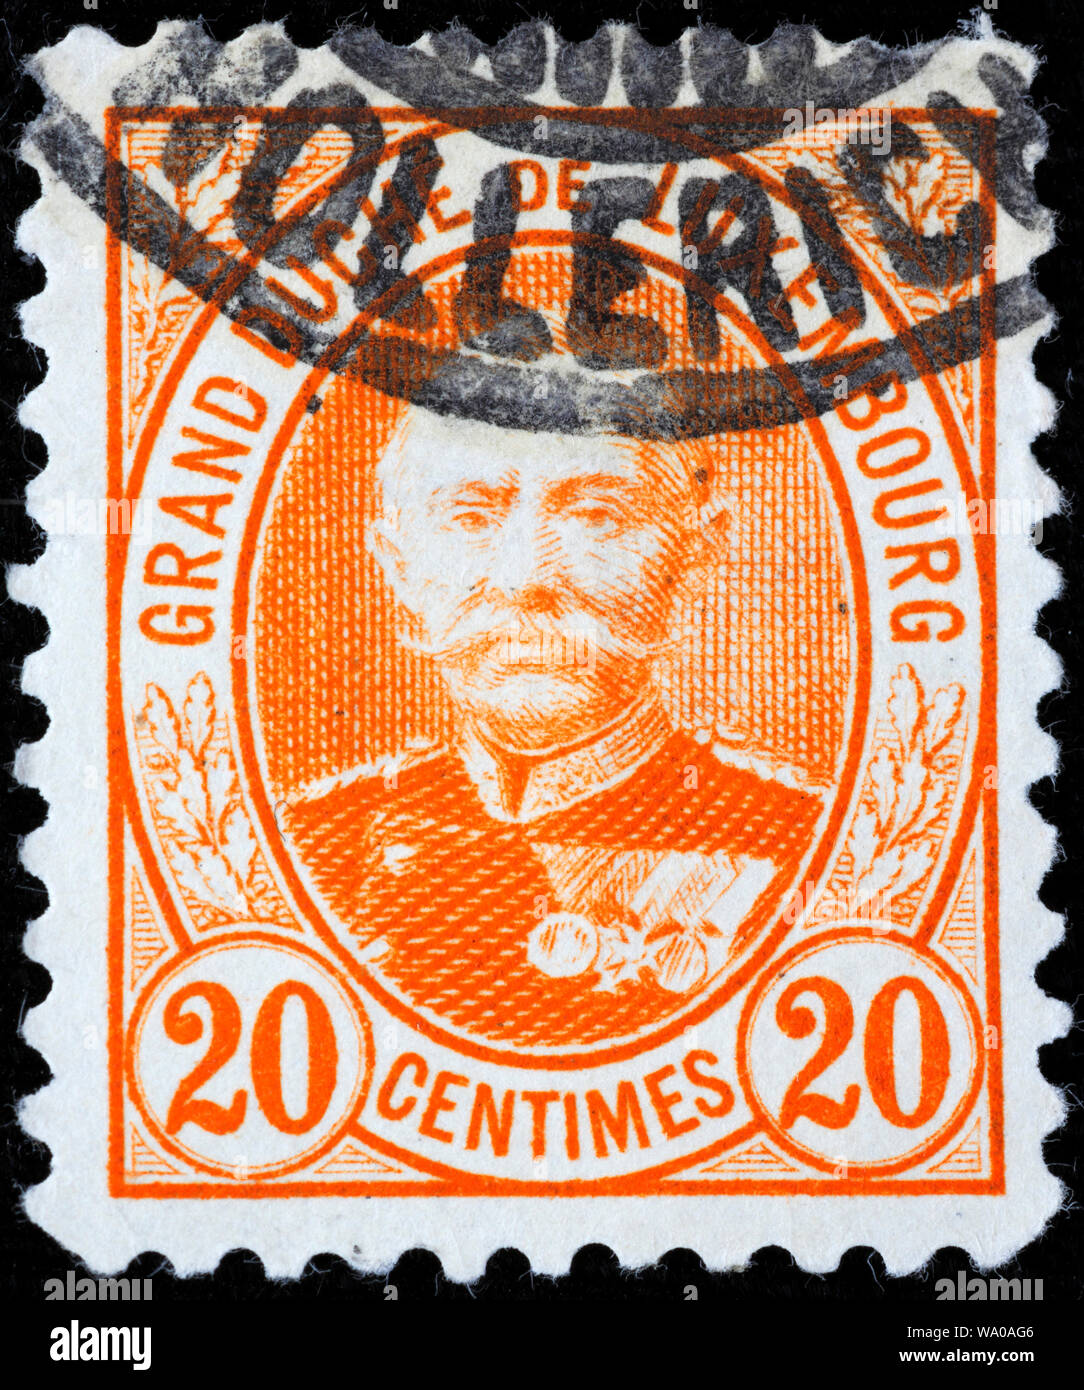 Adolphe I, Grand Duke of Luxembourg (1890-1905), postage stamp, Luxembourg, 1893 Stock Photo